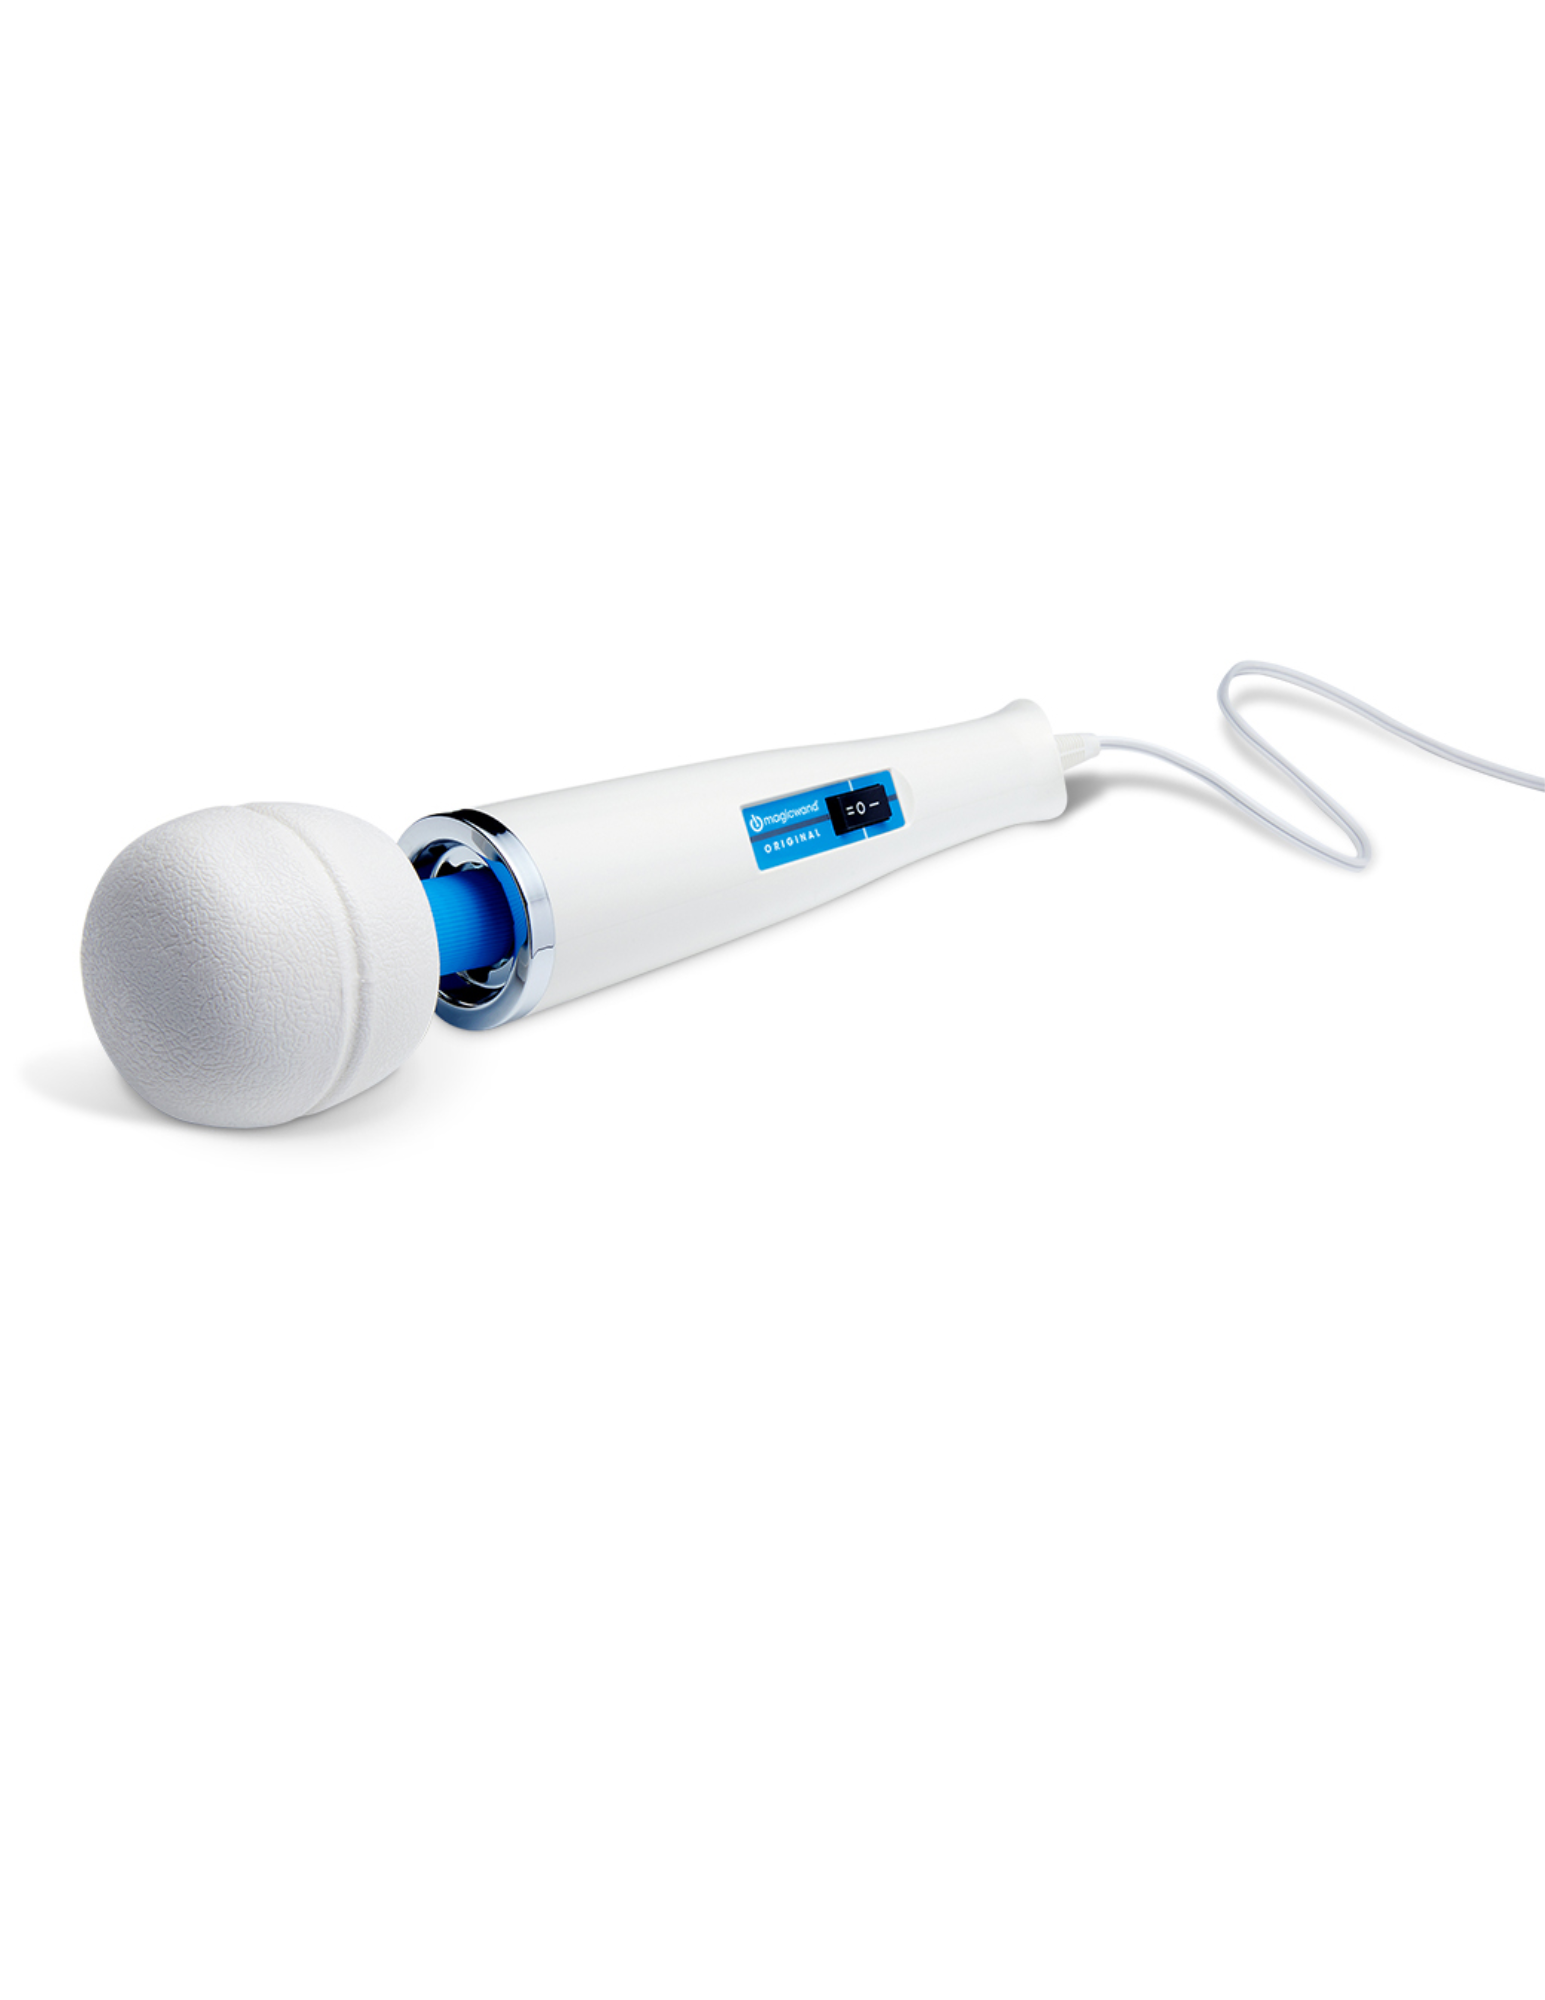 Angled view of the Hitachi Magic Wand Original Massager shows its lengthy cord and prominent massaging head.